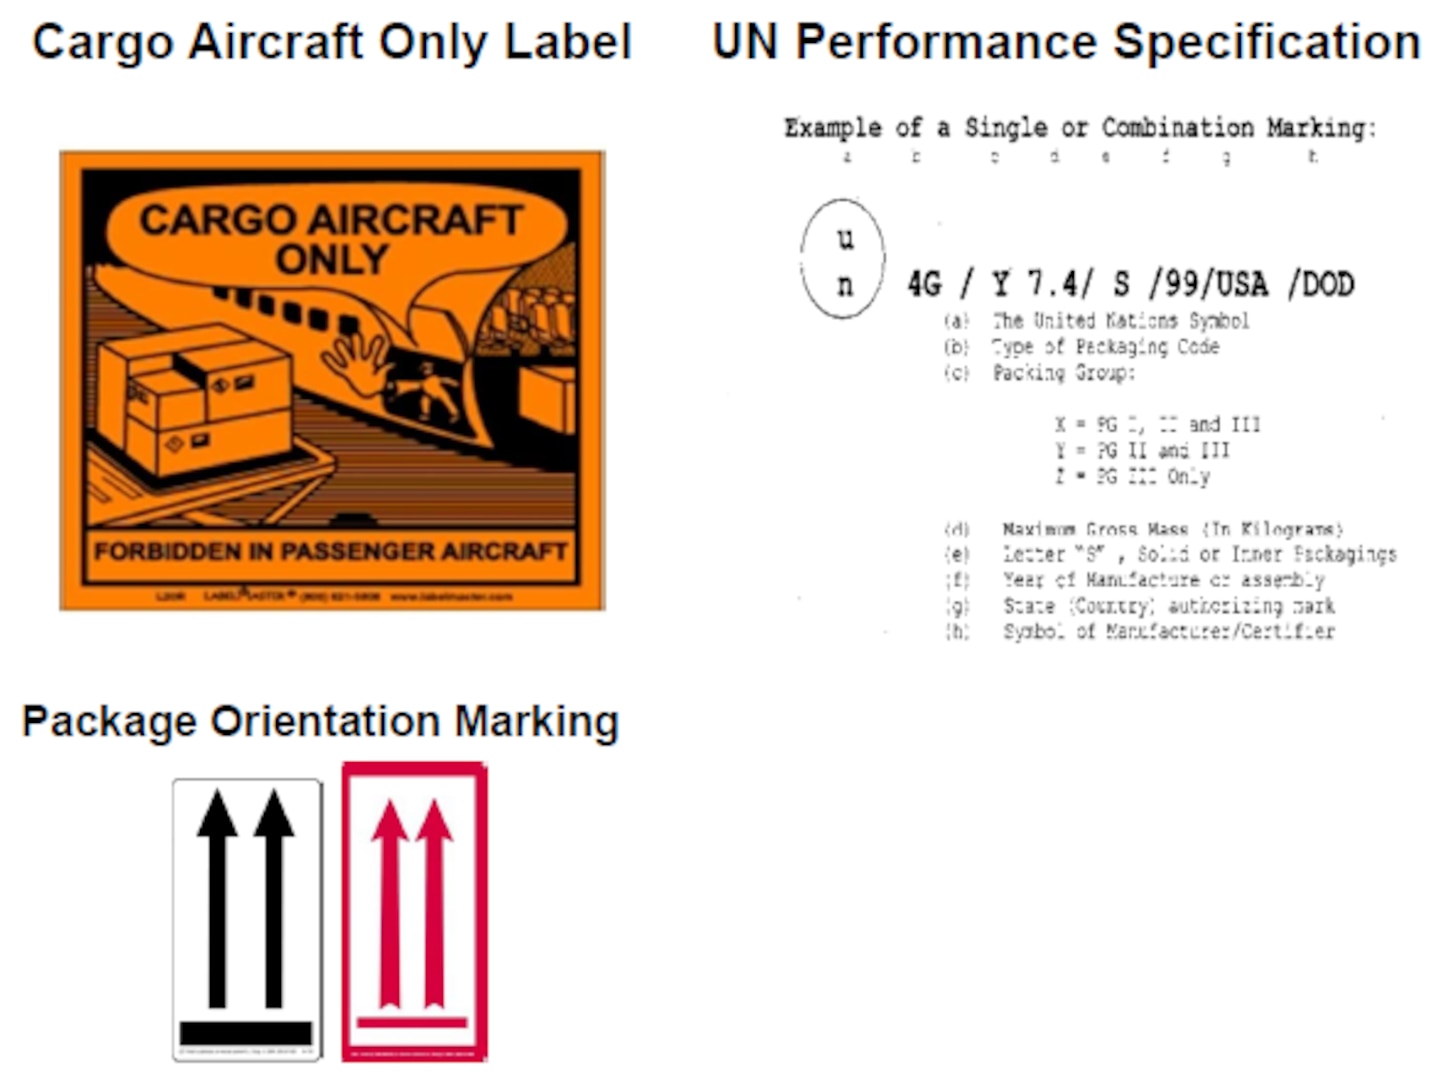 Collection of special markings for packages including Cargo Aircraft Only Label, UN Performance Specification (UN Number), and Package Orientation Marking.